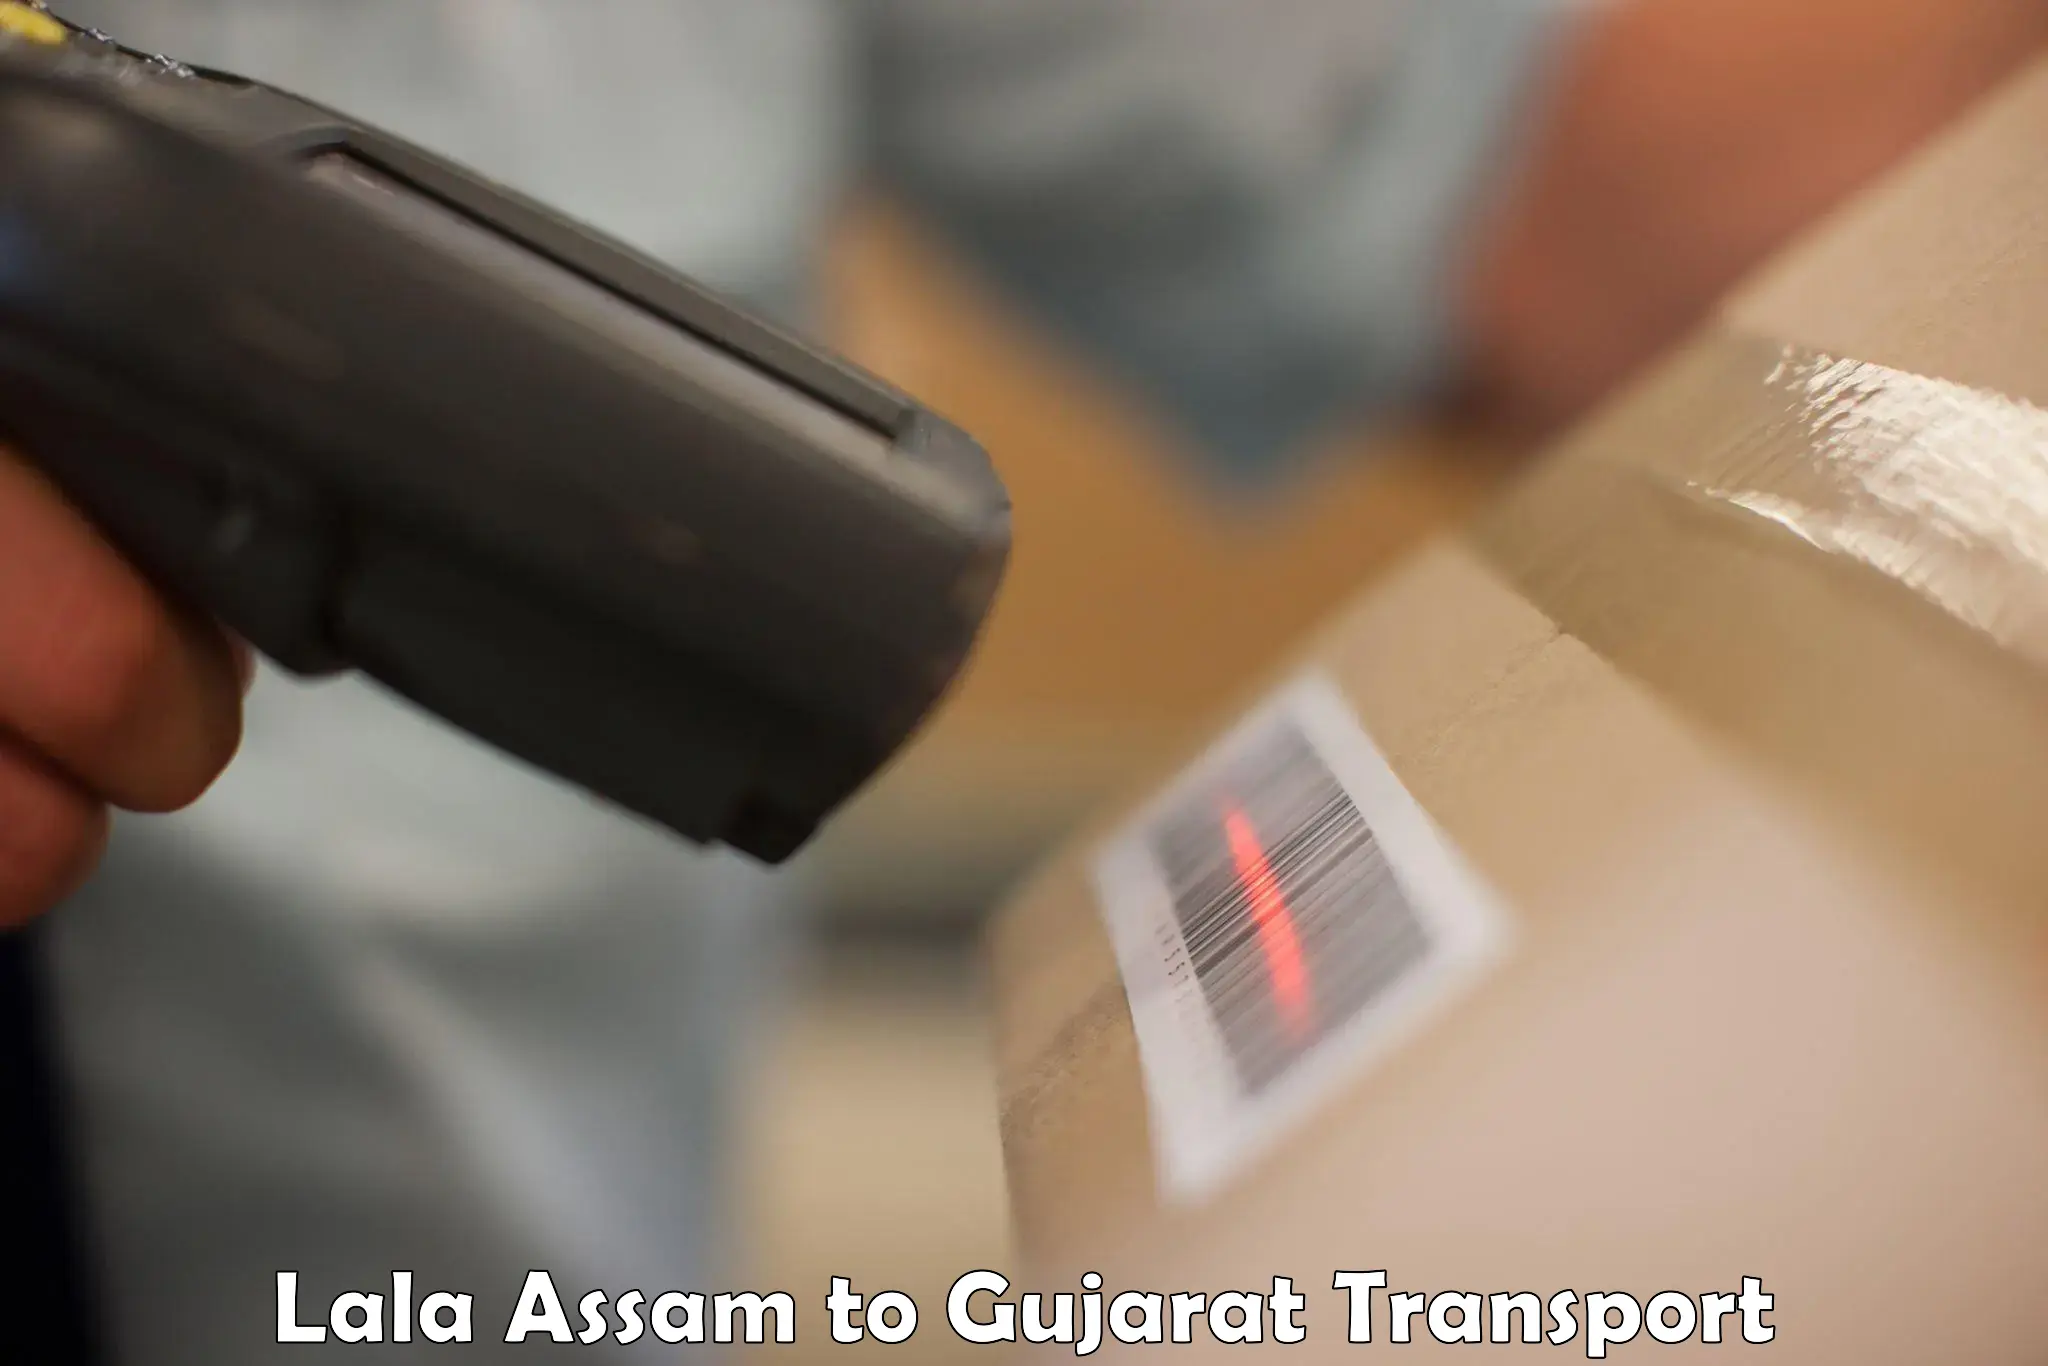 Truck transport companies in India Lala Assam to Modasa